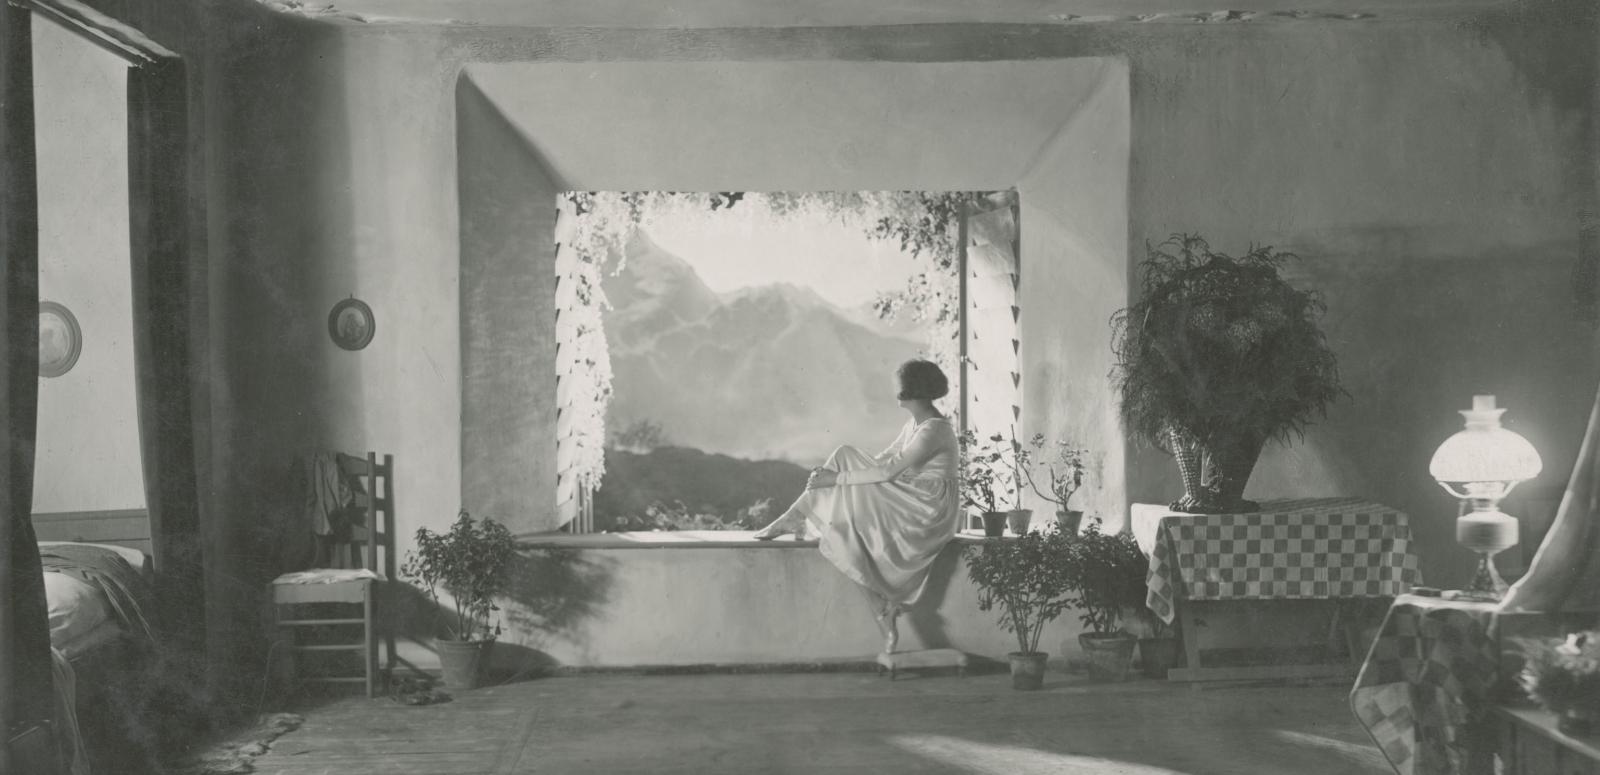 Leni Riefenstahl sits looking out the window in a still from the German film Der Heilige Berg, 1926.